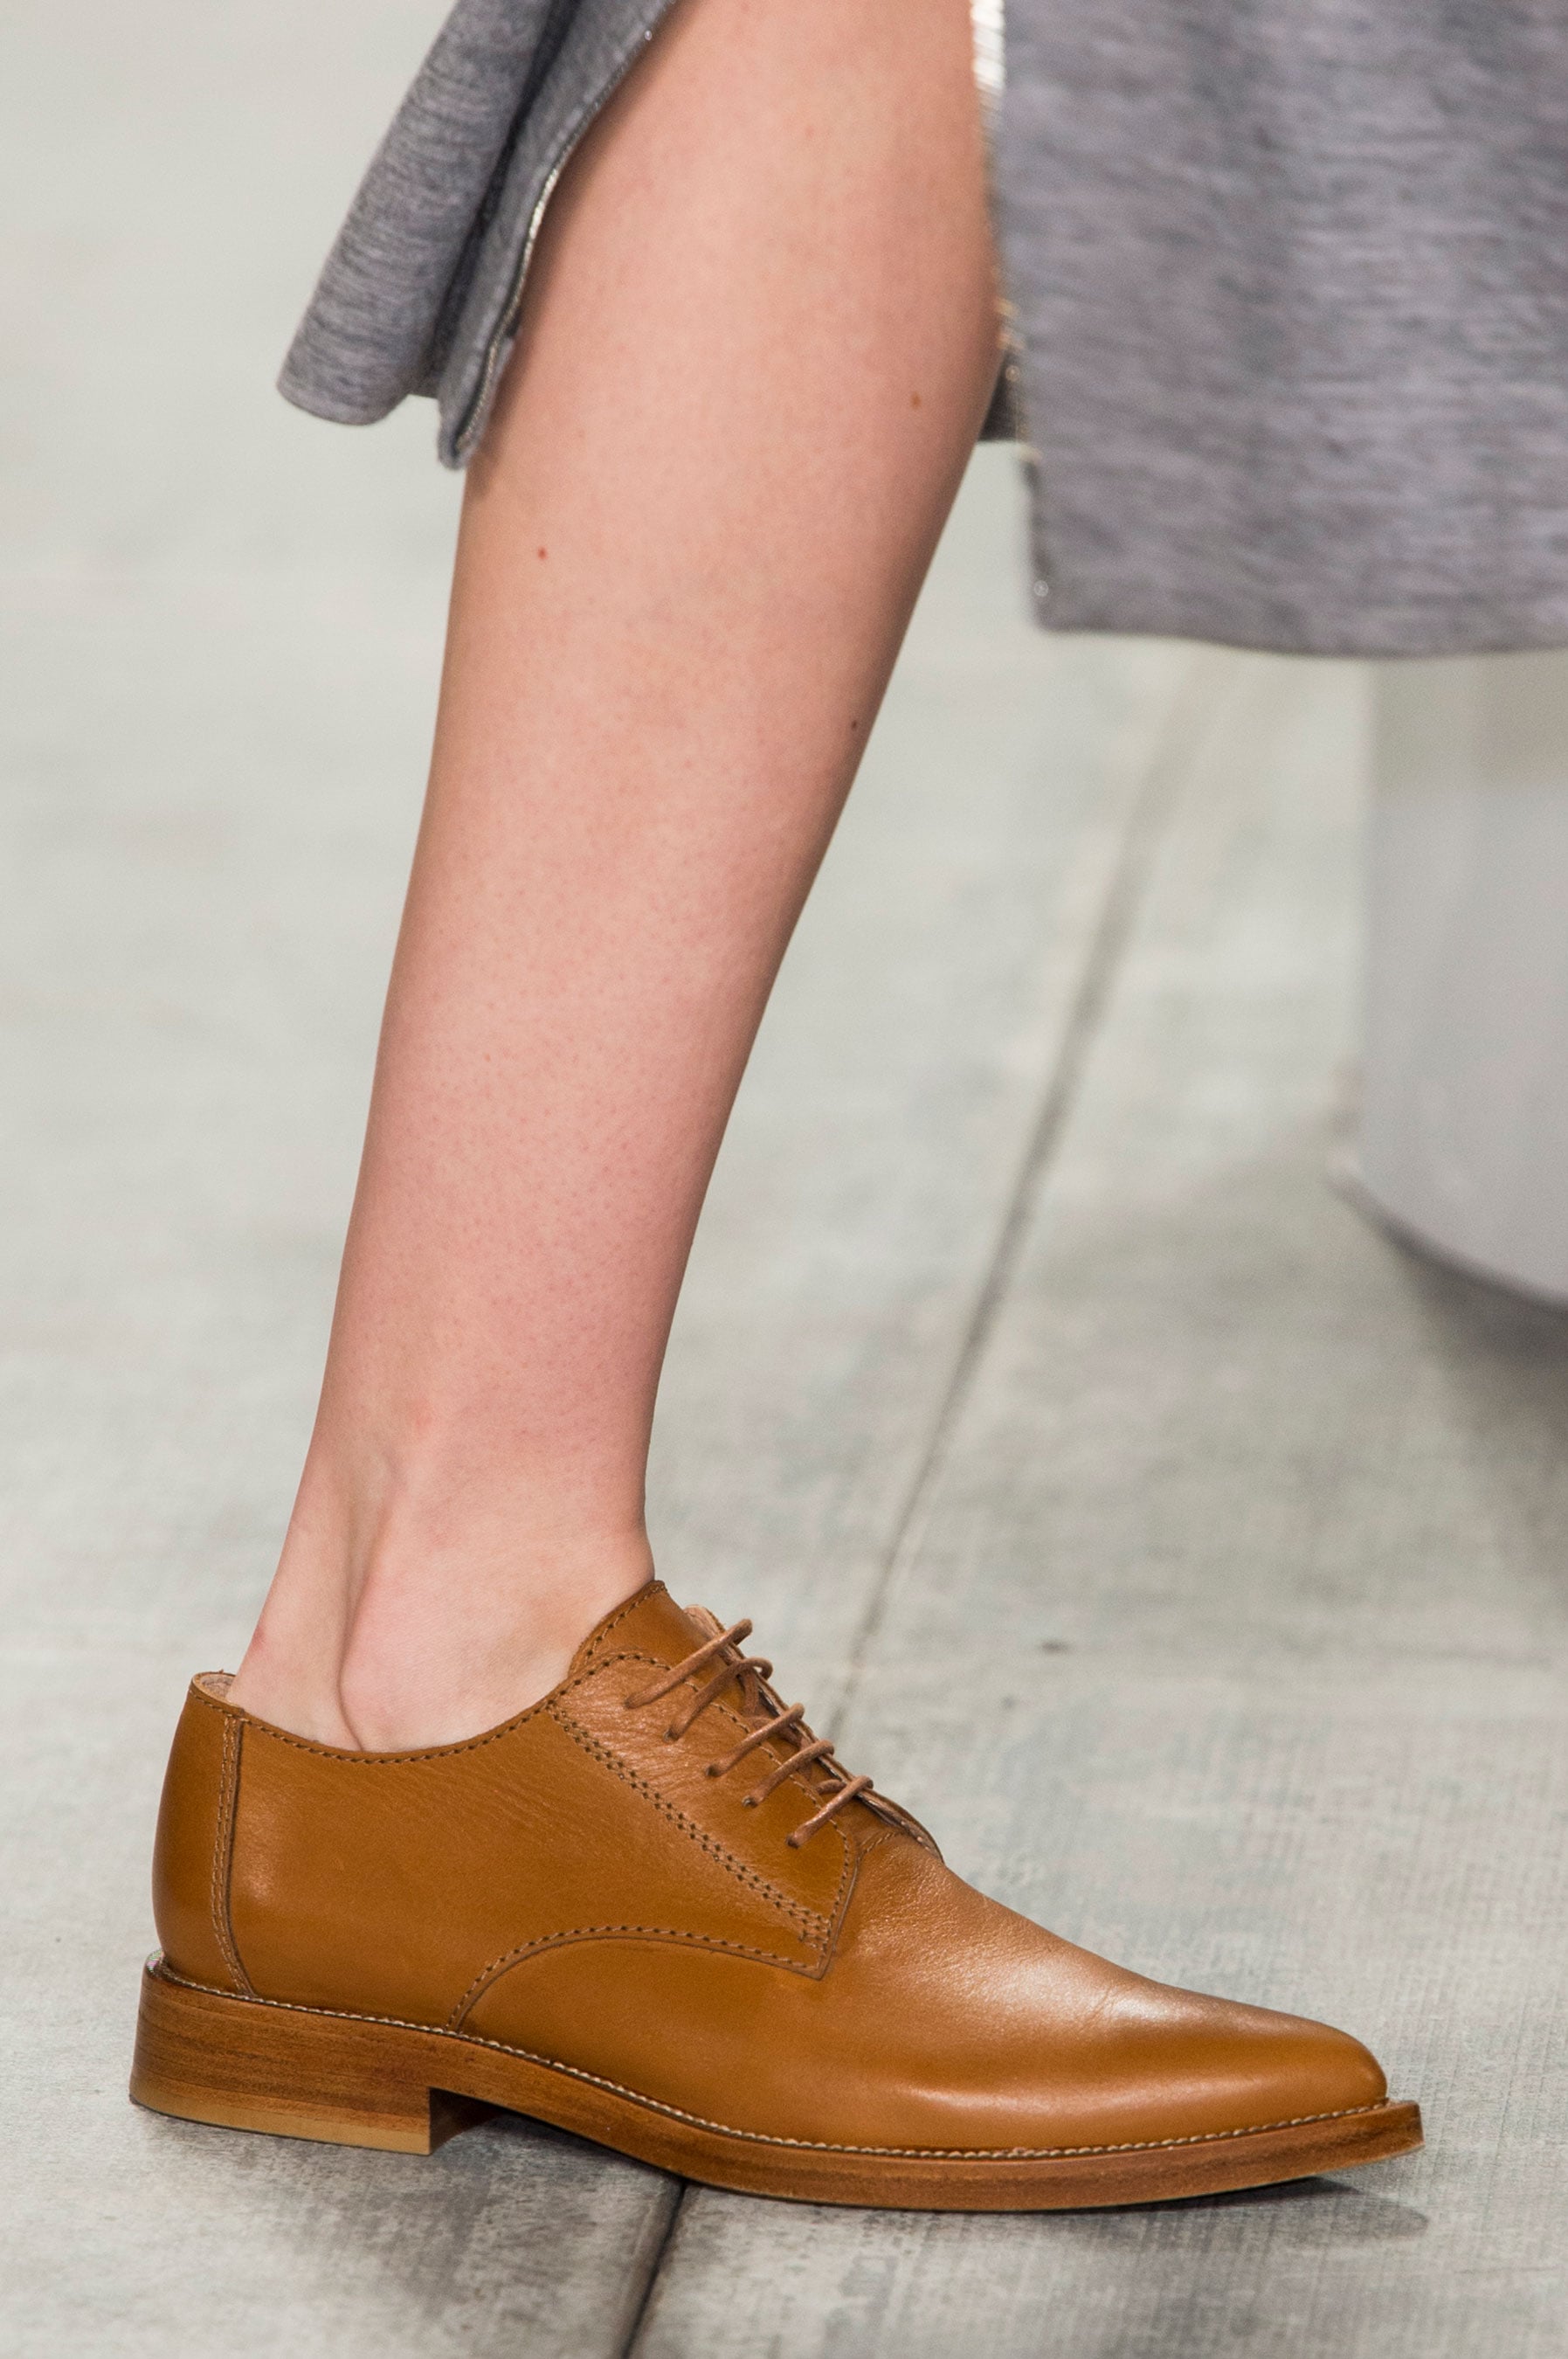 Fall 2015 | The Best Shoes to Hit the Runways of New York Fashion Week | POPSUGAR Fashion Photo 89